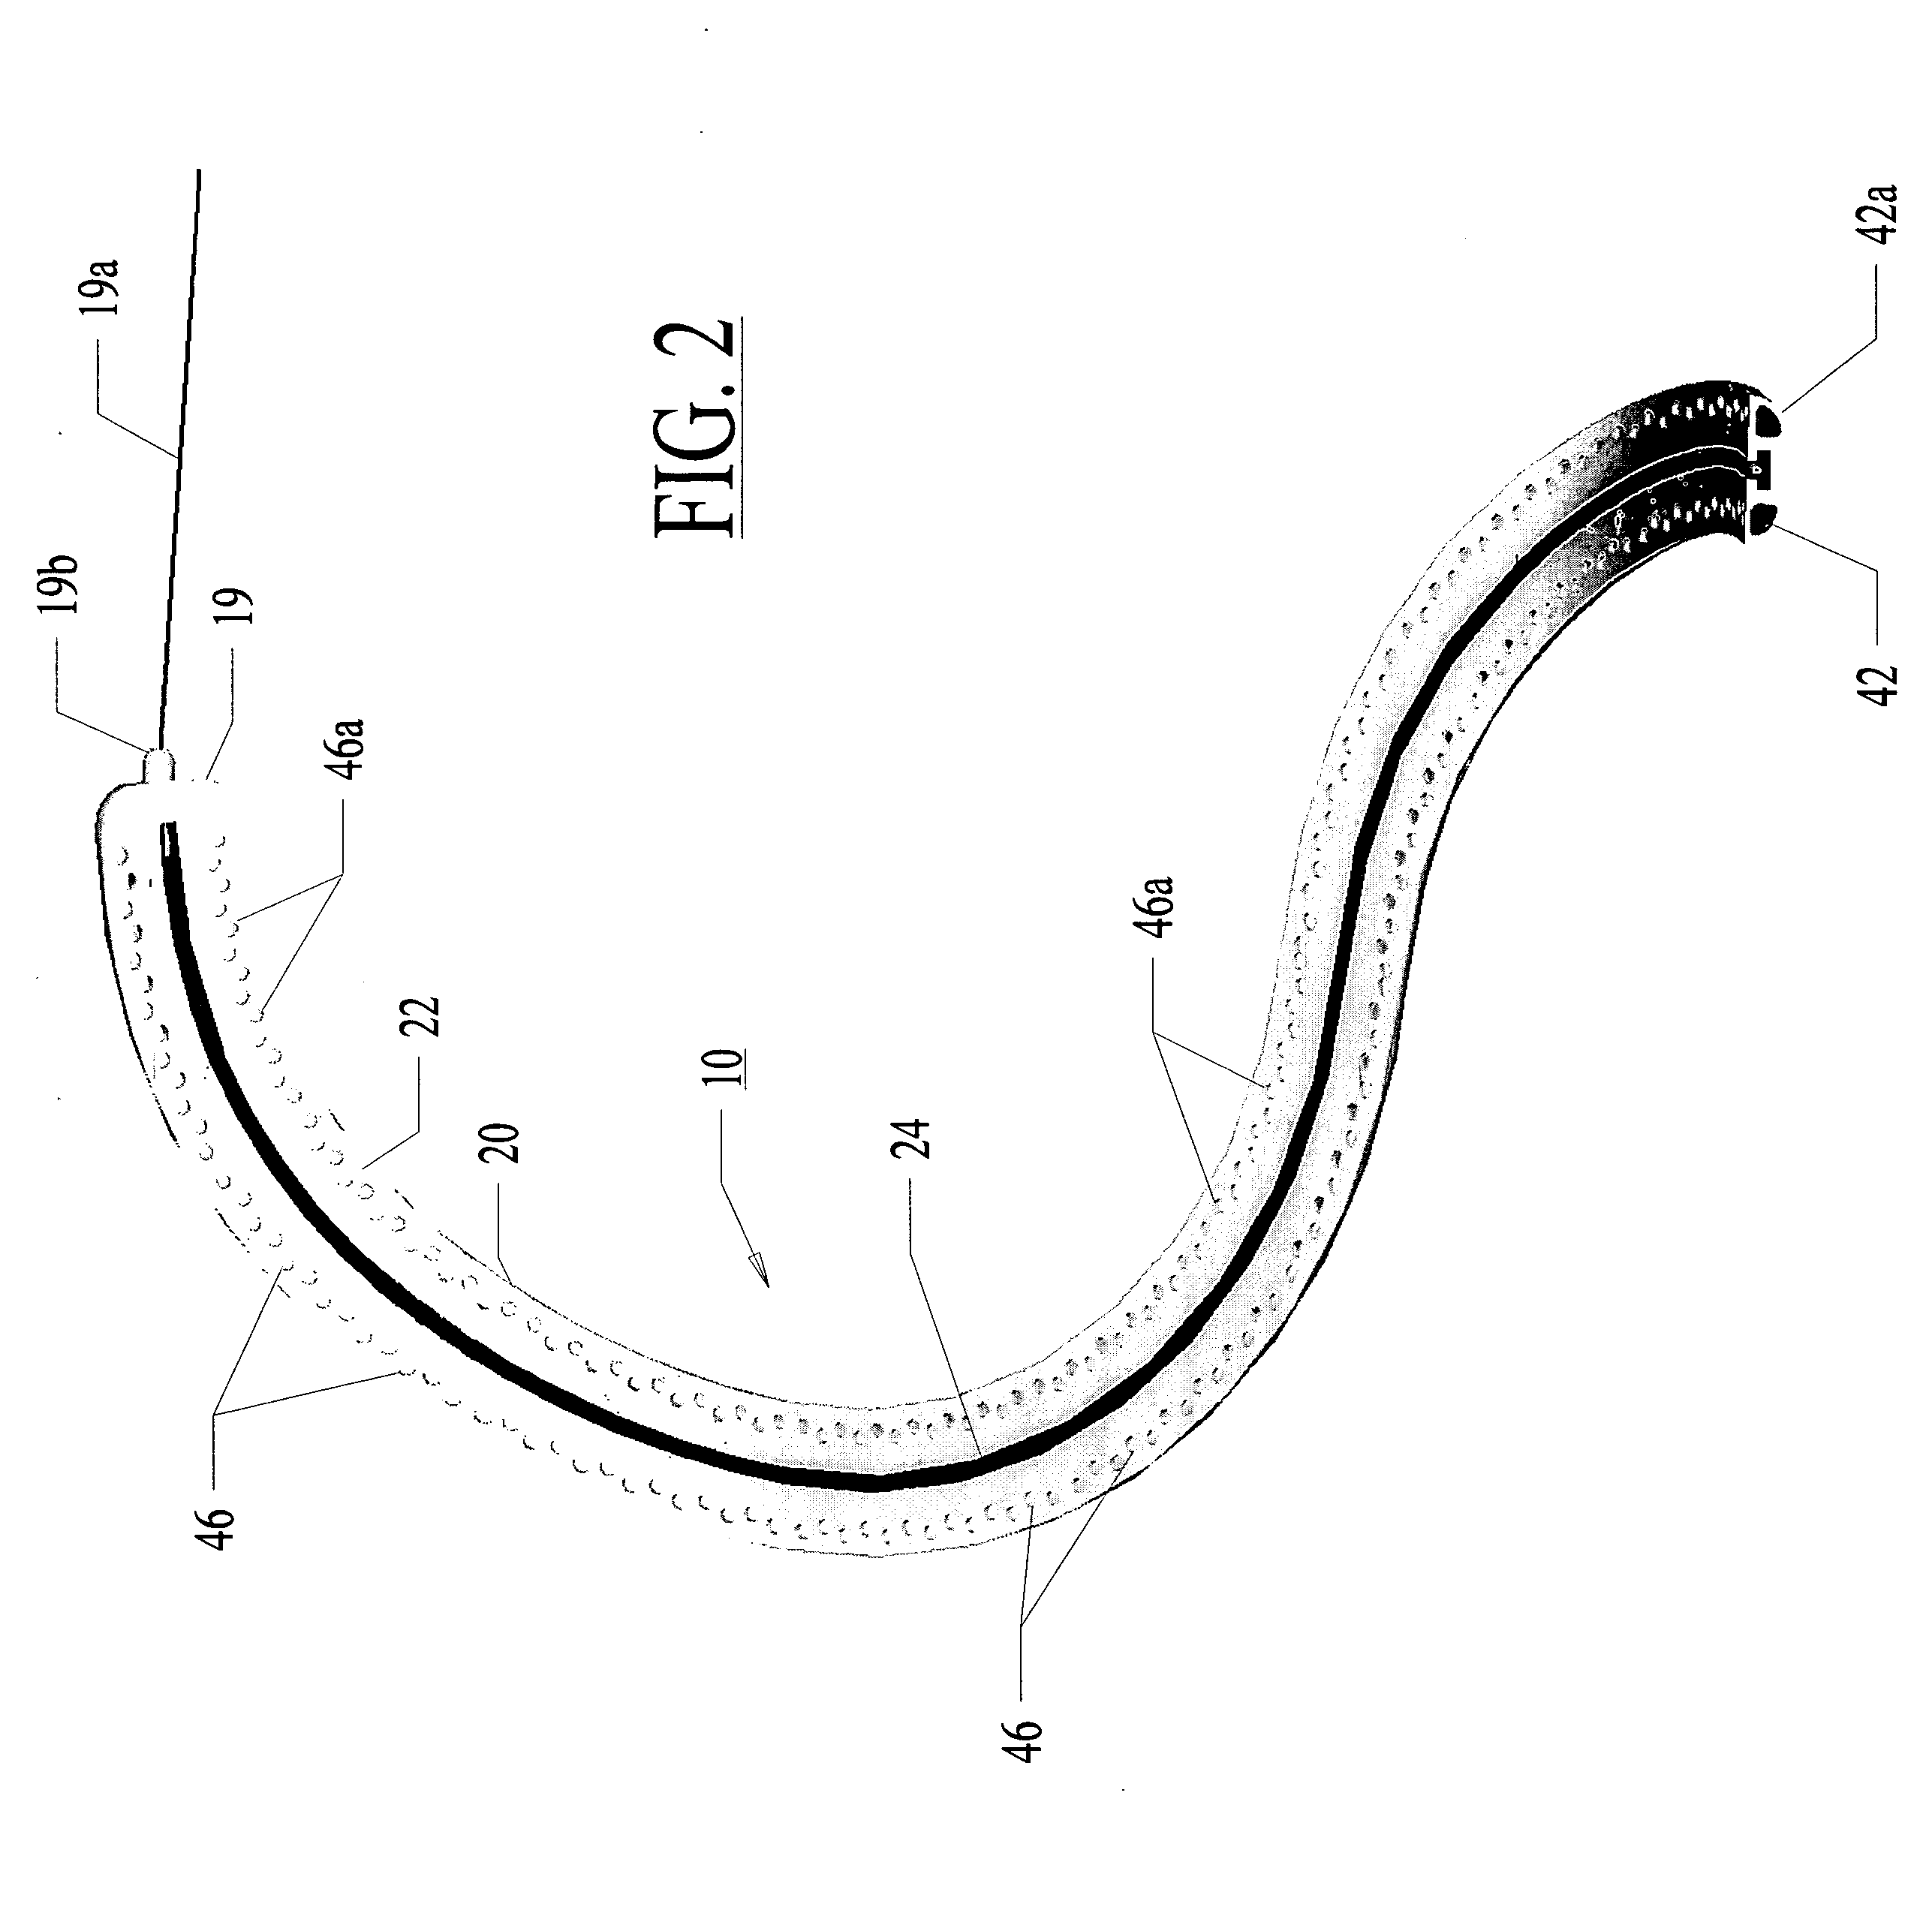 Apparatus and method for guided ablation treatment